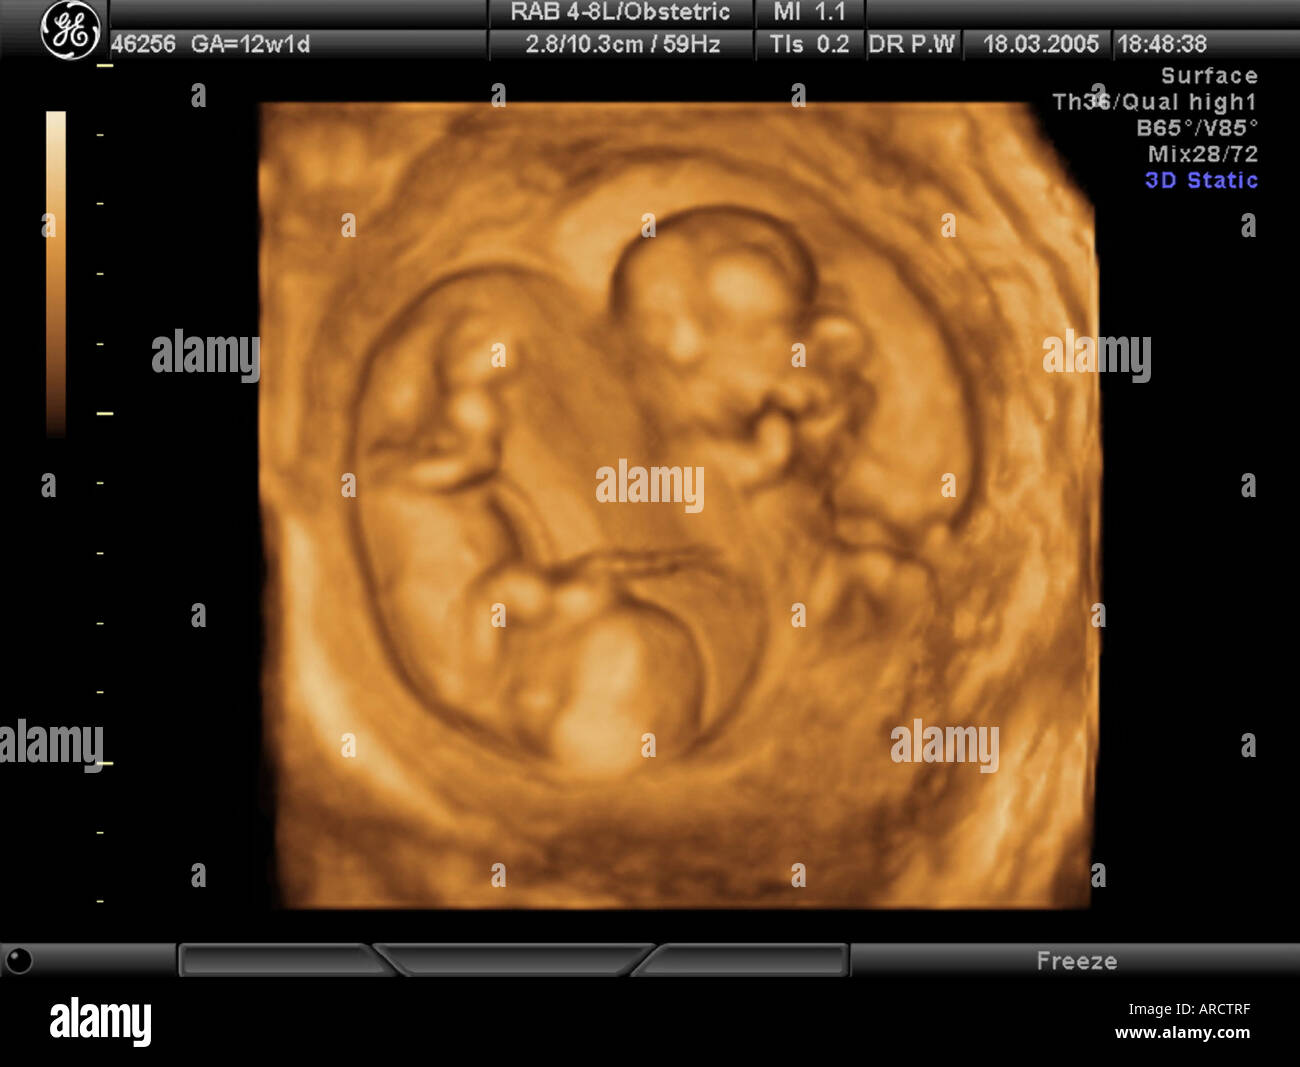 3D ultrasound of a twin pregnancy at 12 weeks Photo - Alamy